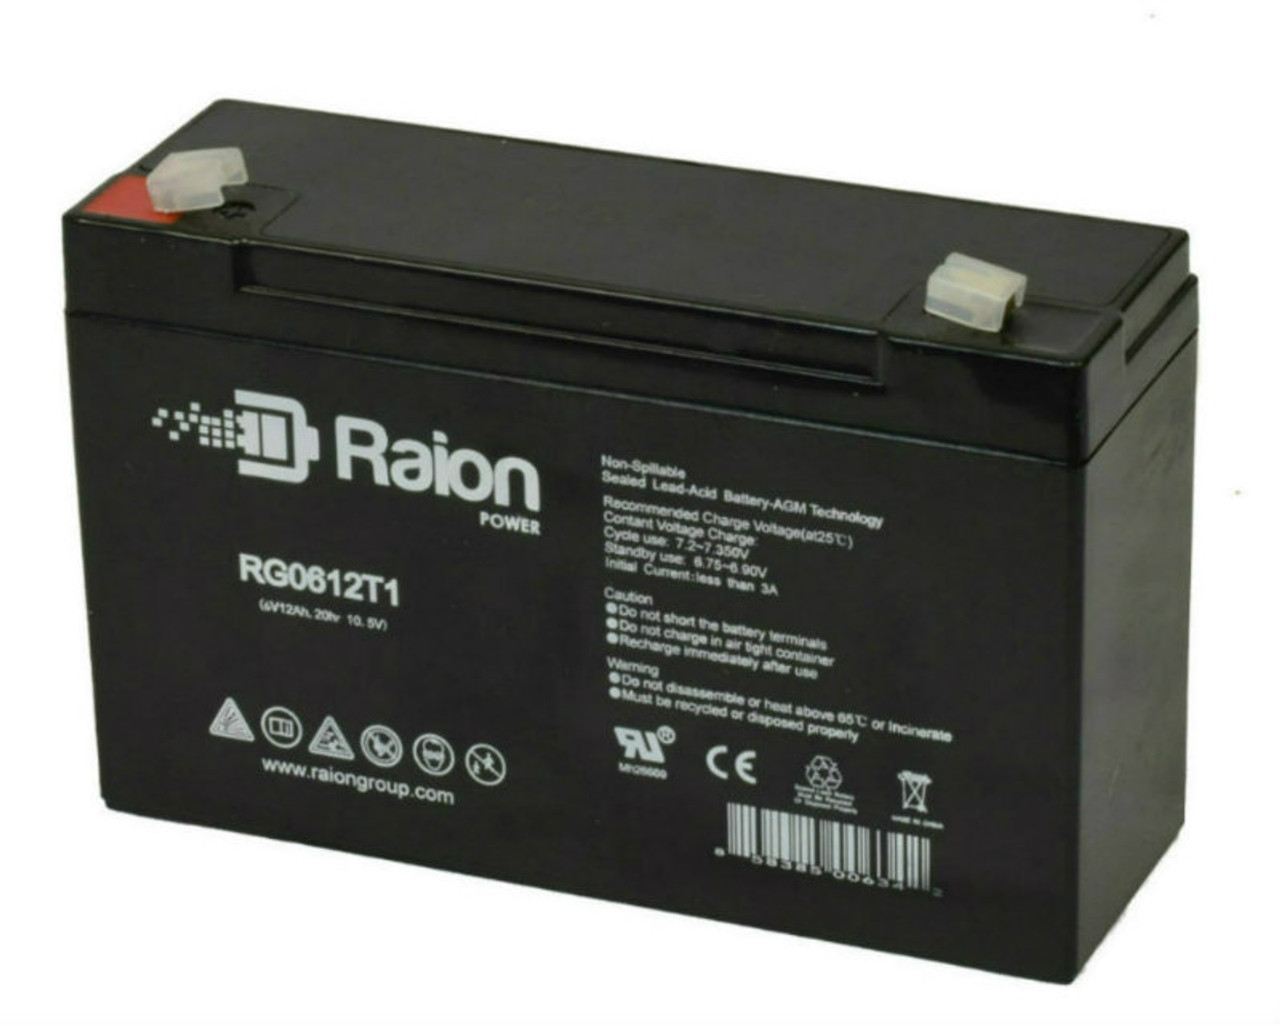 Raion Power RG06120T1 Replacement Battery for RIMA UN10-6